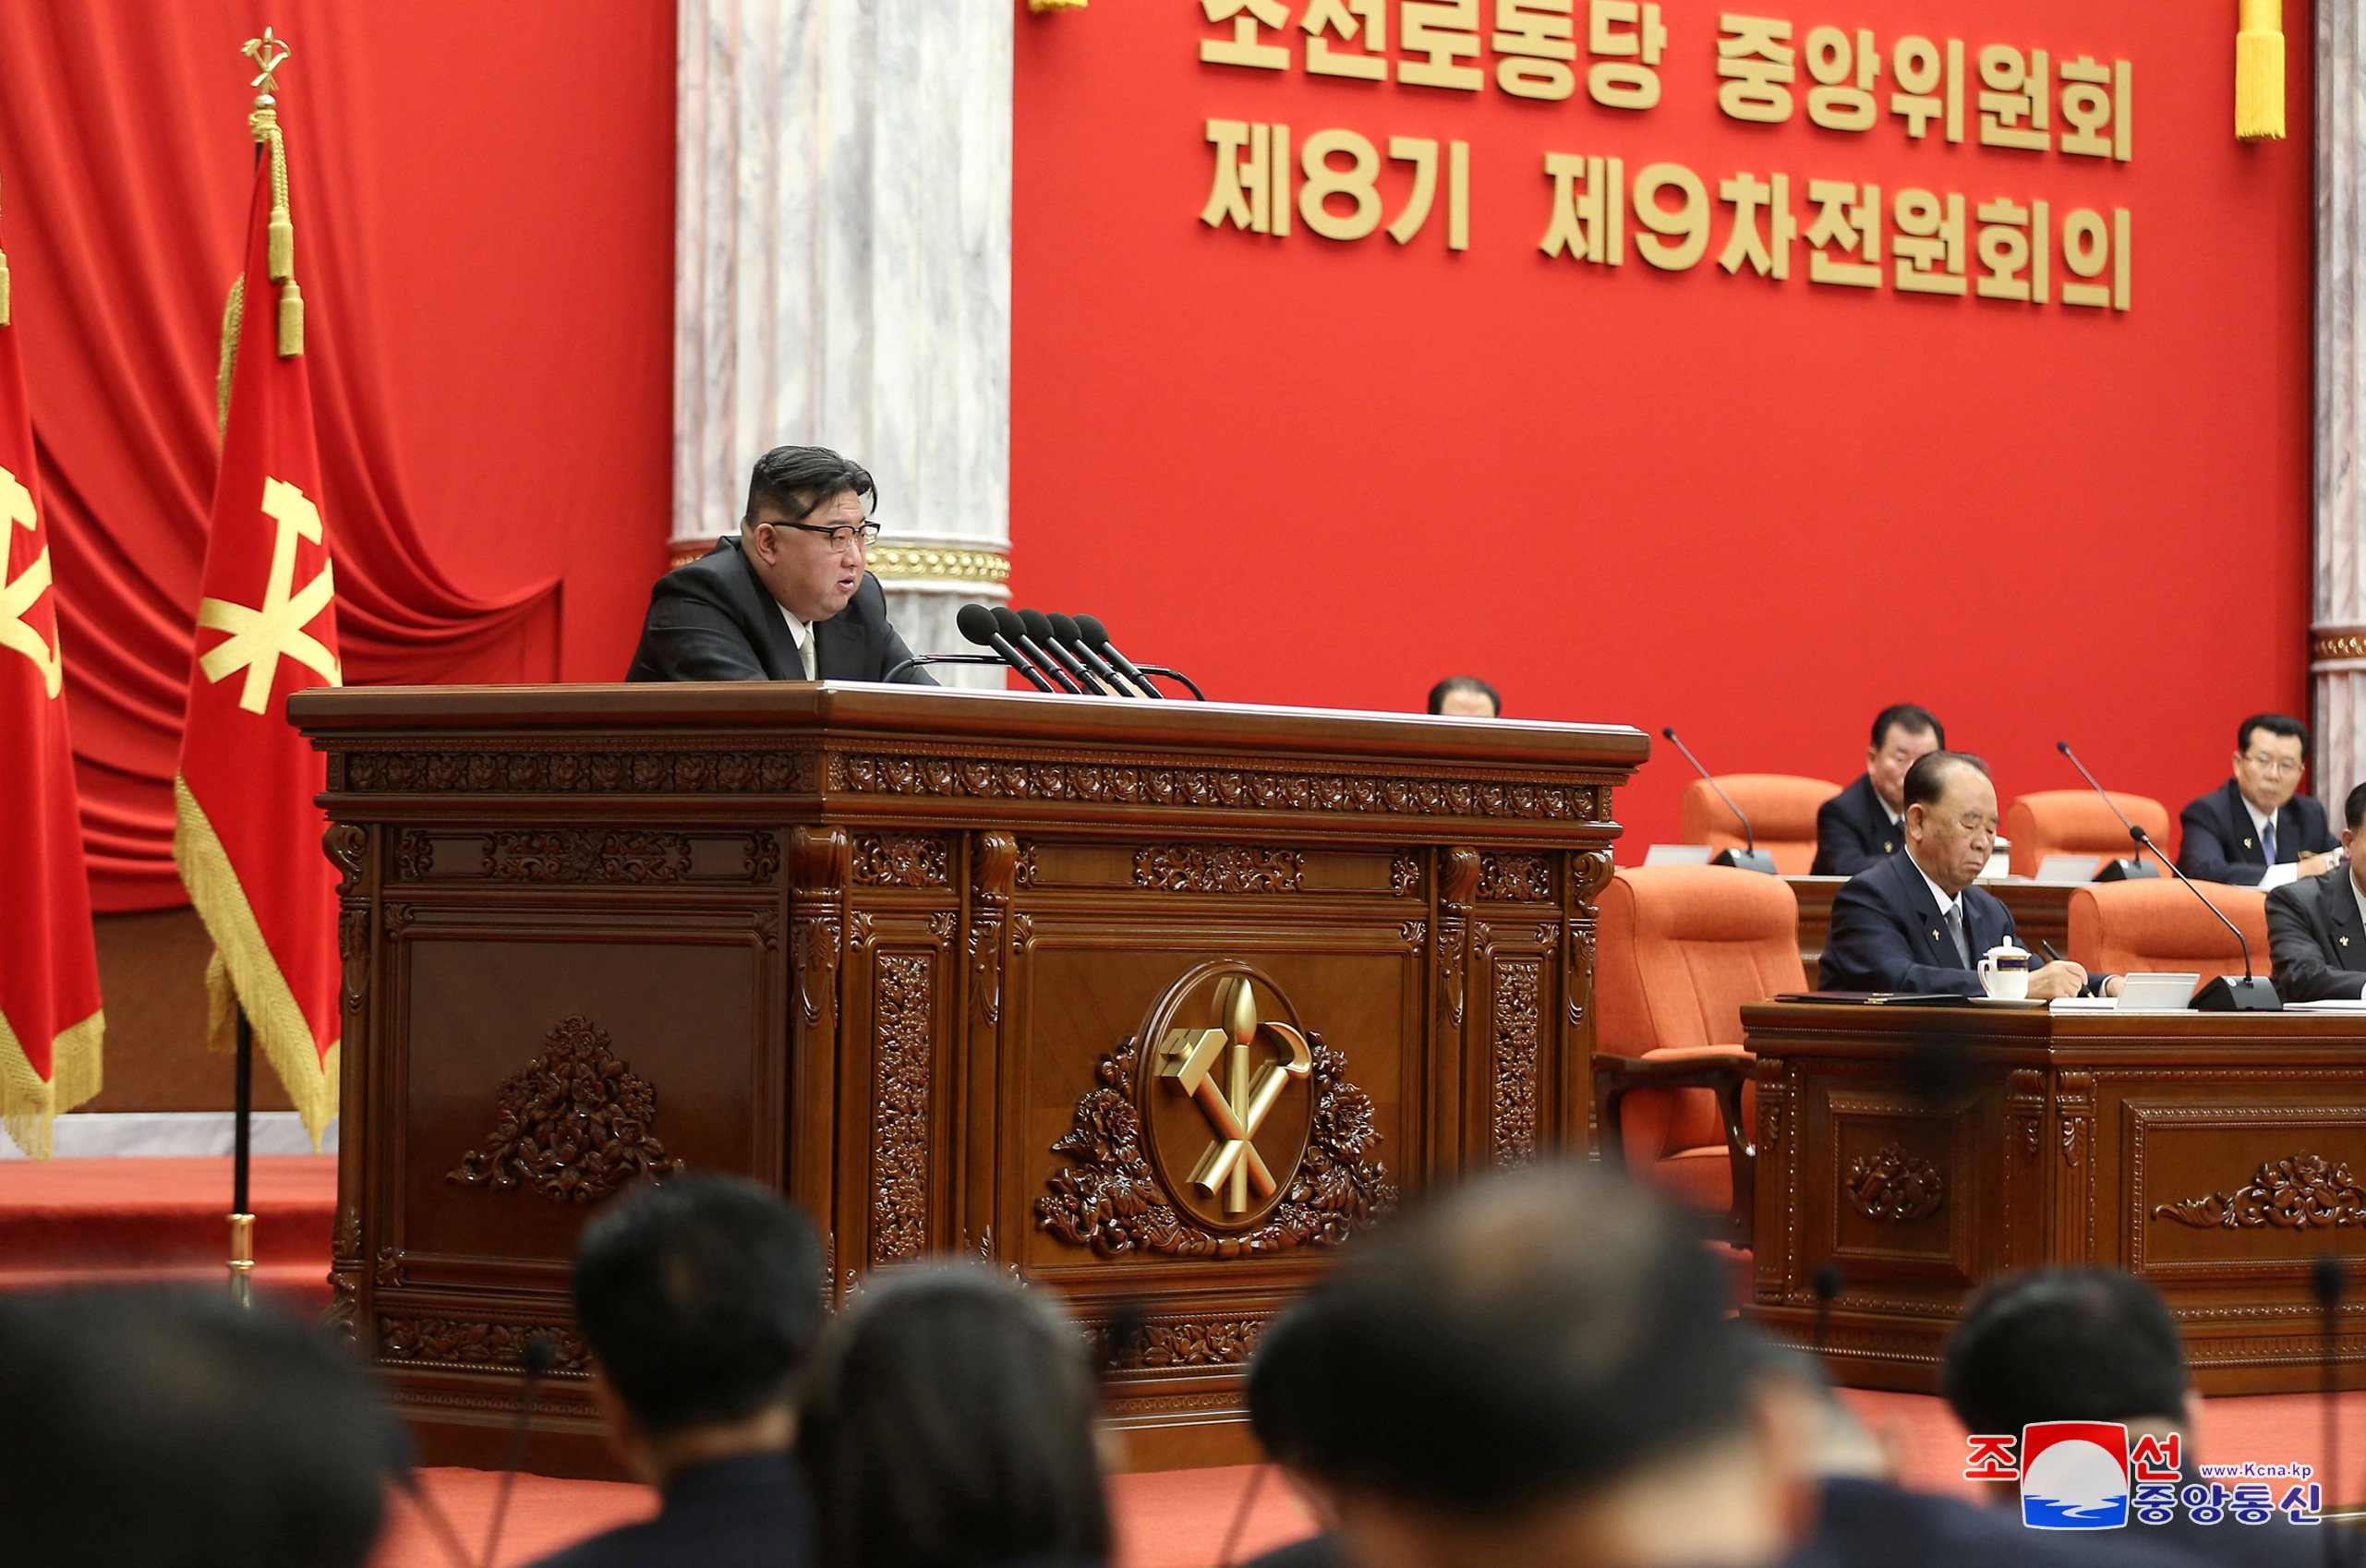 North Korean leader Kim Jong-un attends the December 2023 plenary meeting of the Central Committee of the Workers’ Party of Korea, in Pyongyang, North Korea on Wednesday. Photo: KCNA via Reuters